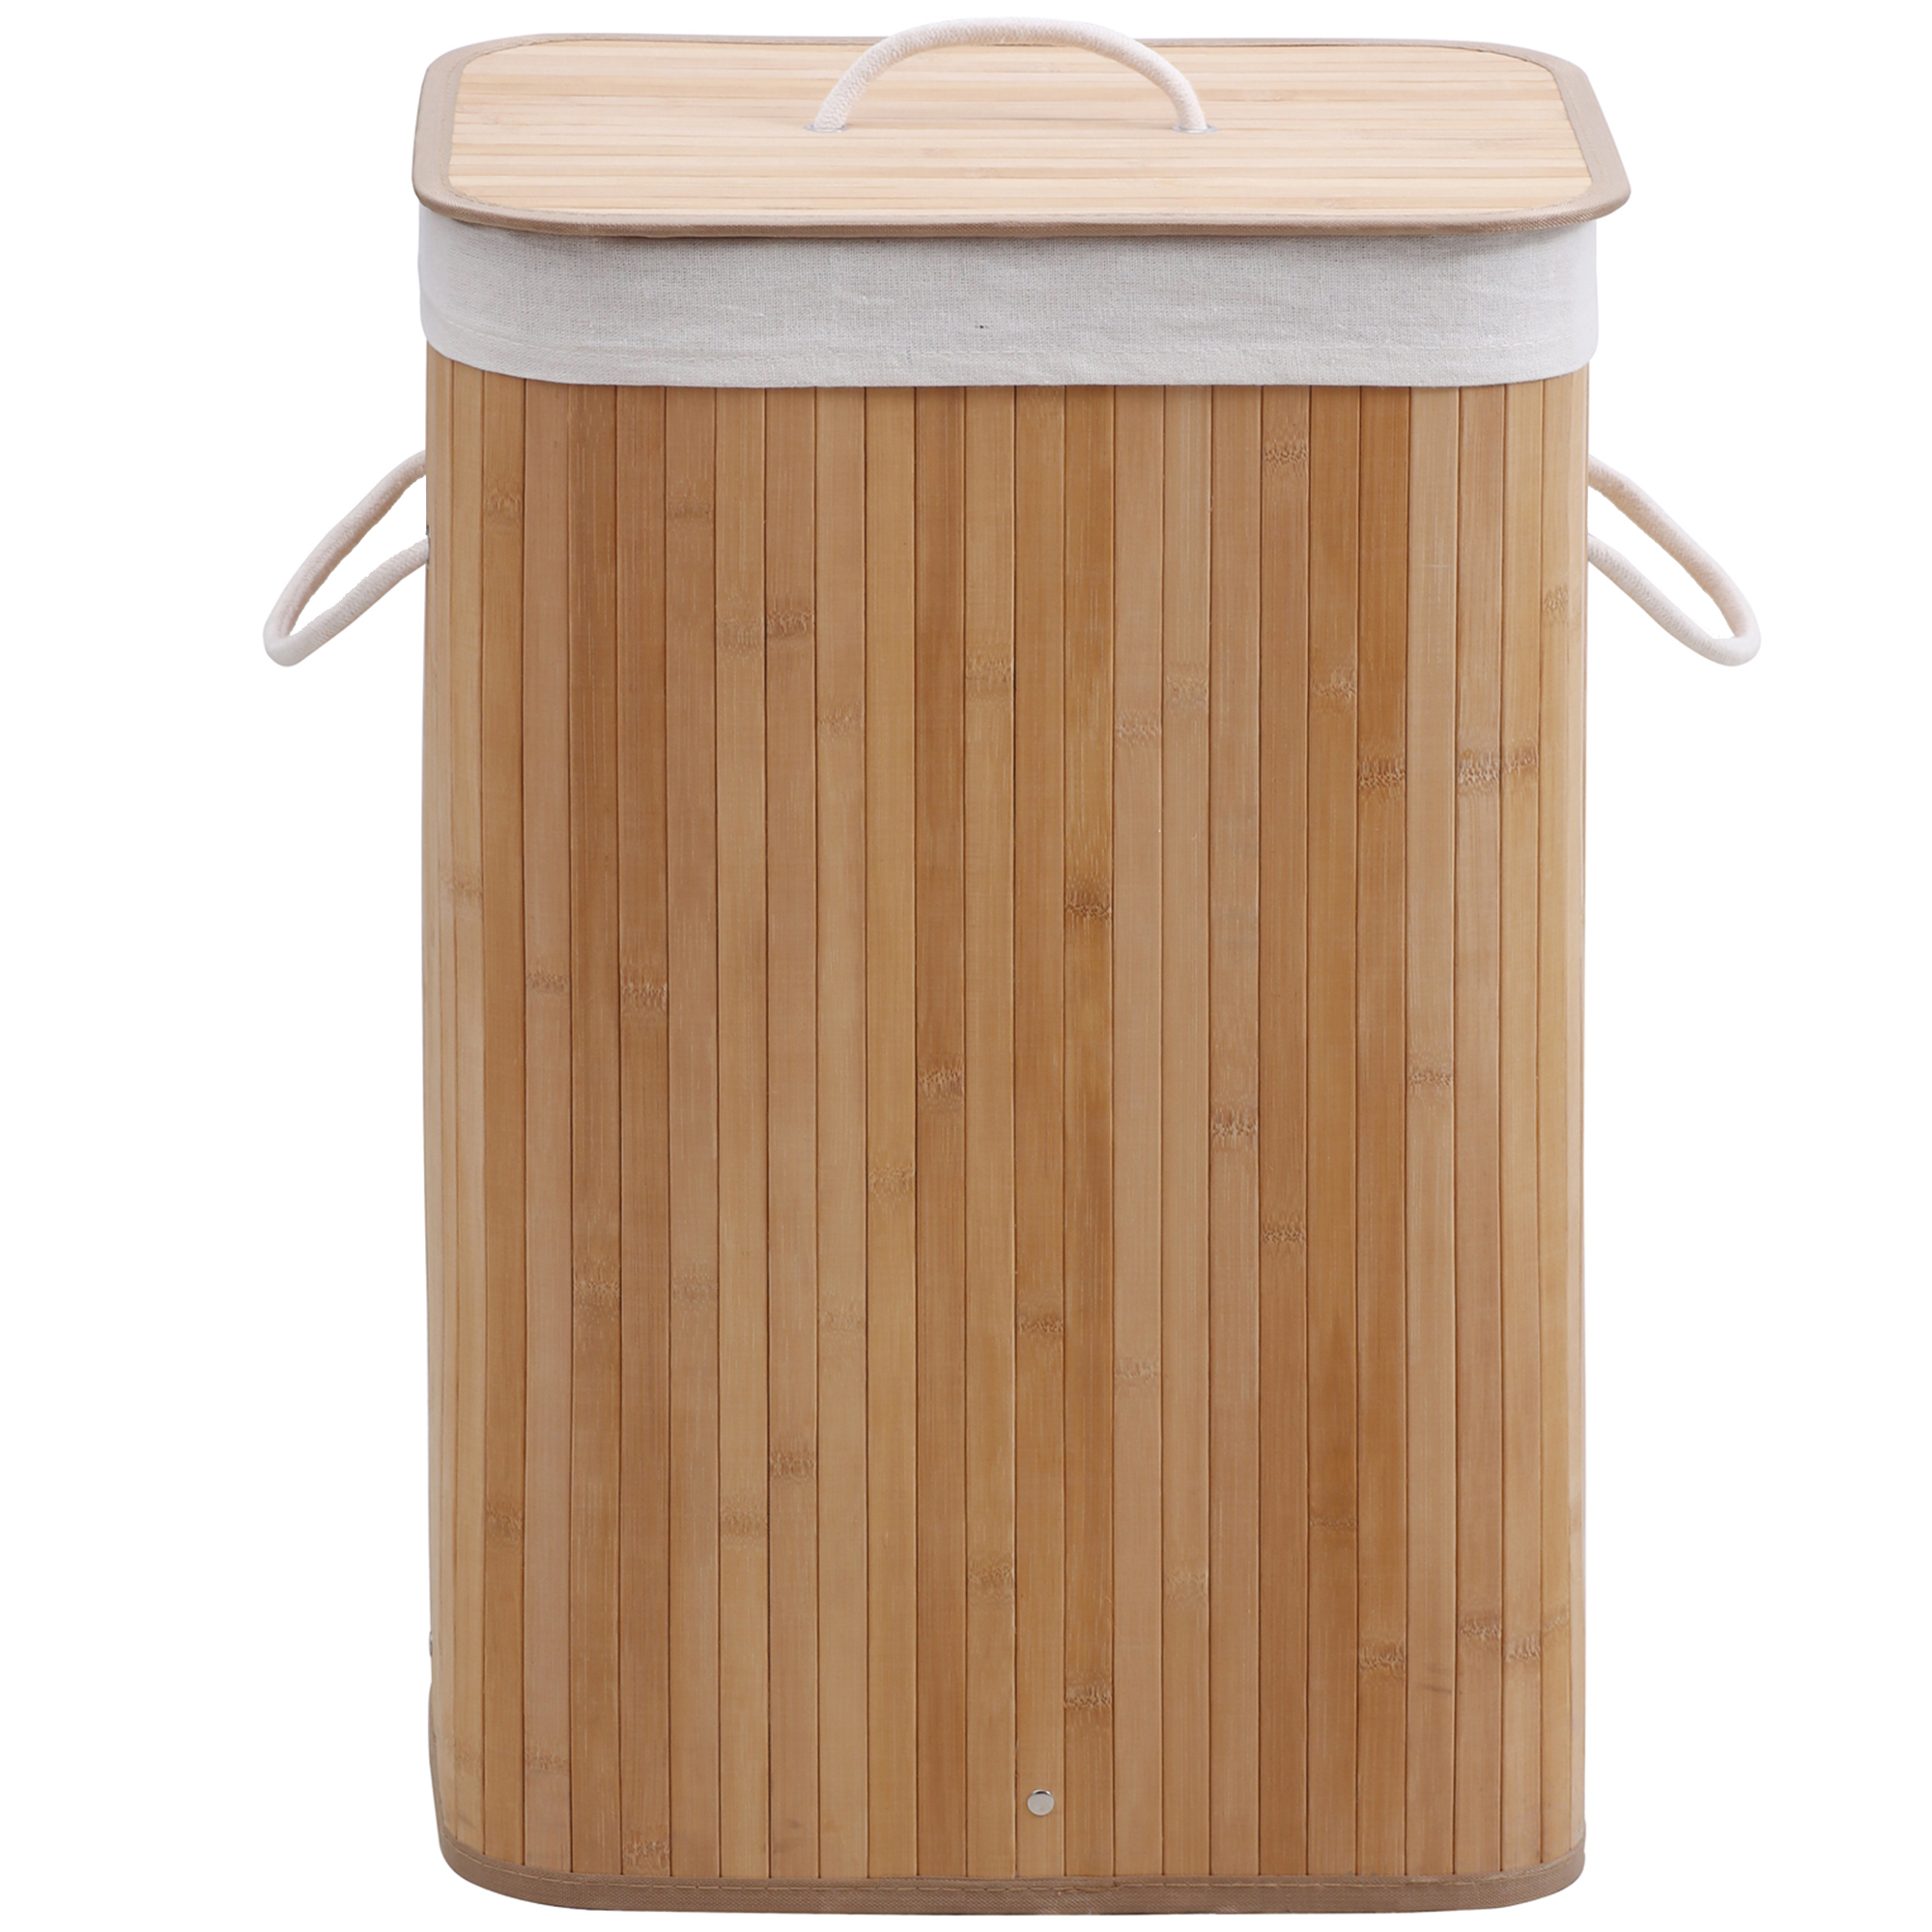 COUNTRY CLUB Bamboo Laundry Hamper Basket Clothes Storage Organizer With Lid 